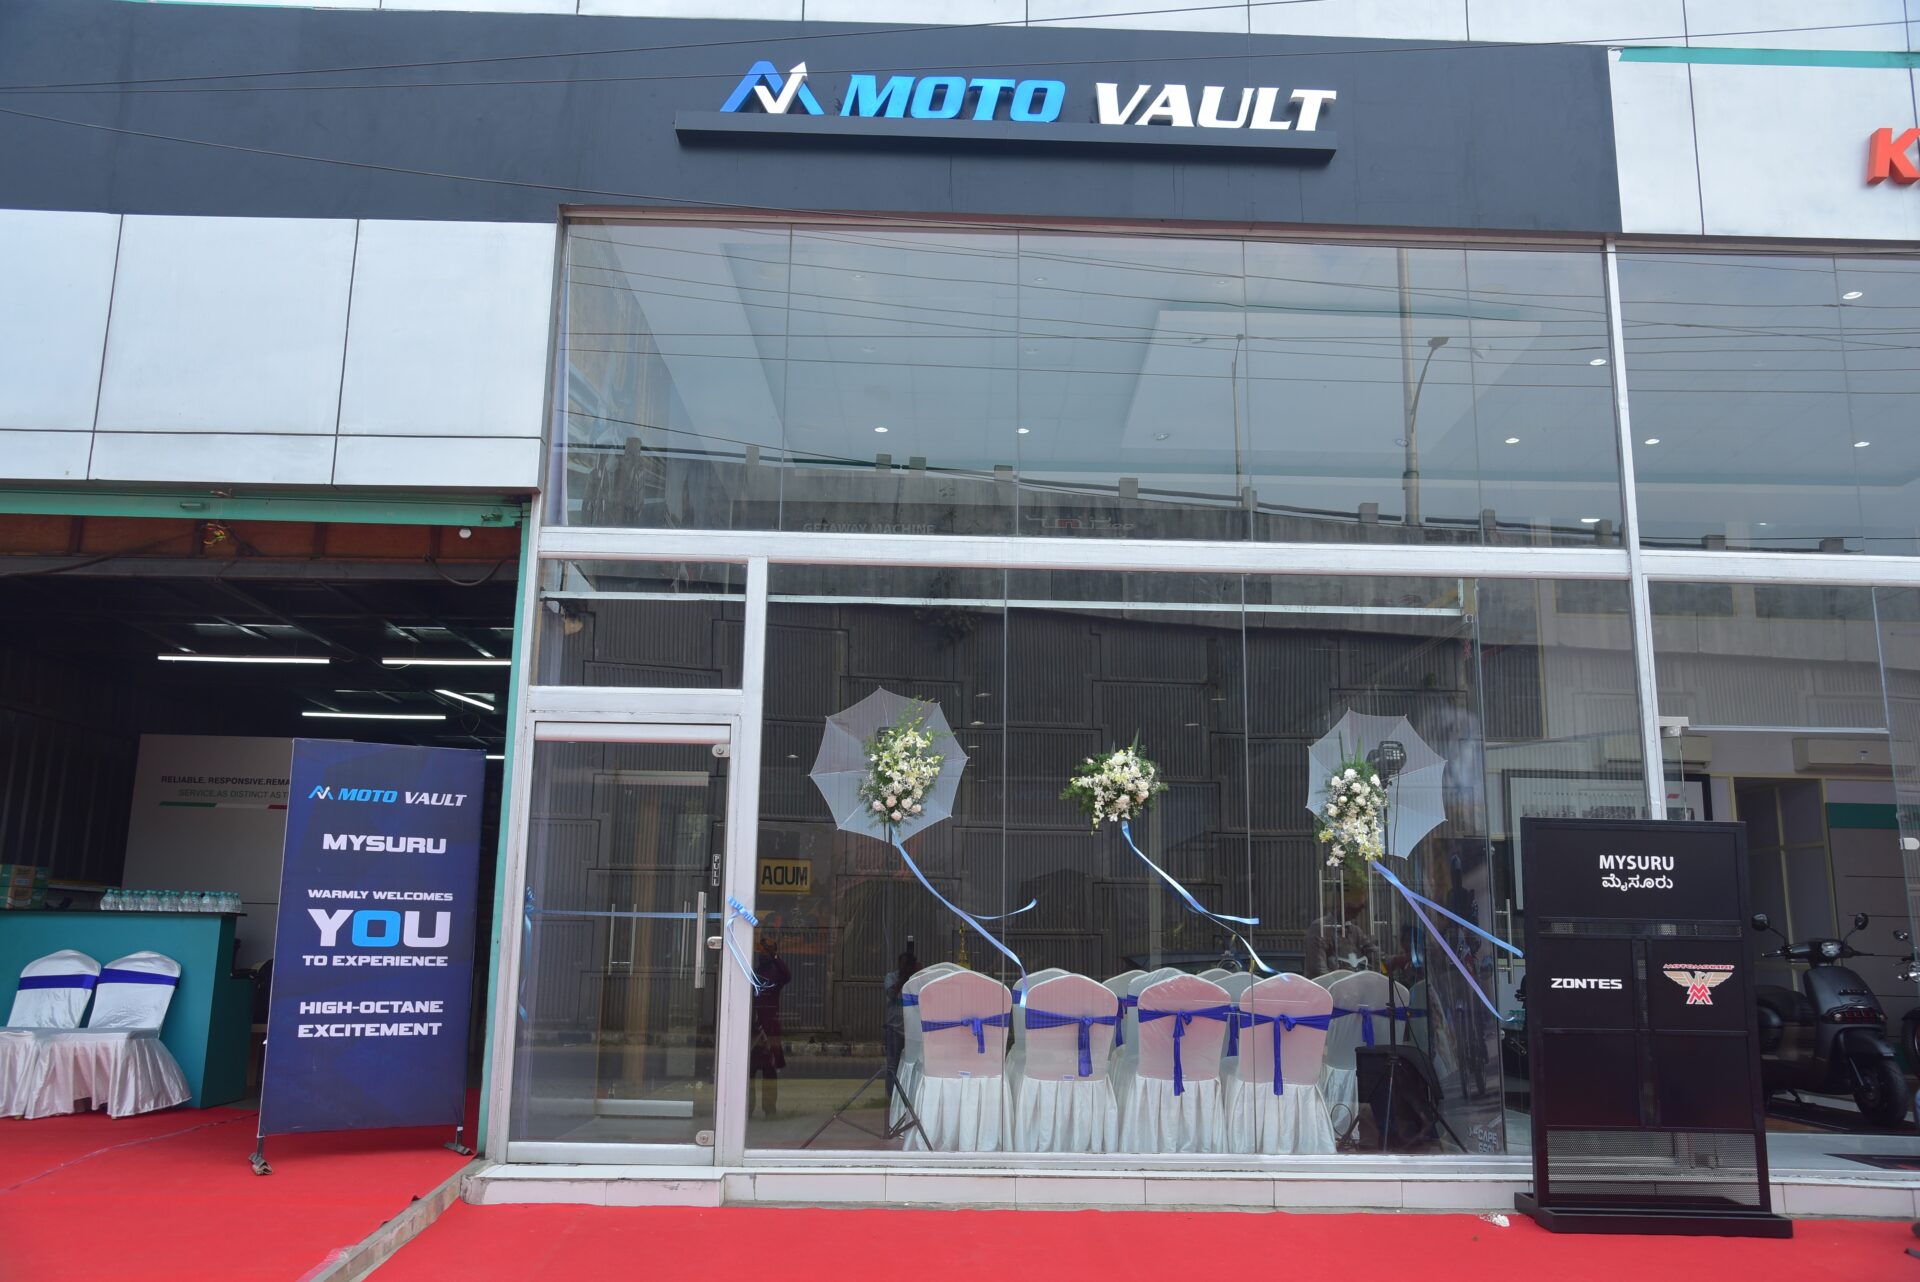 Read more about the article Motovault Extends Services To Mysuru